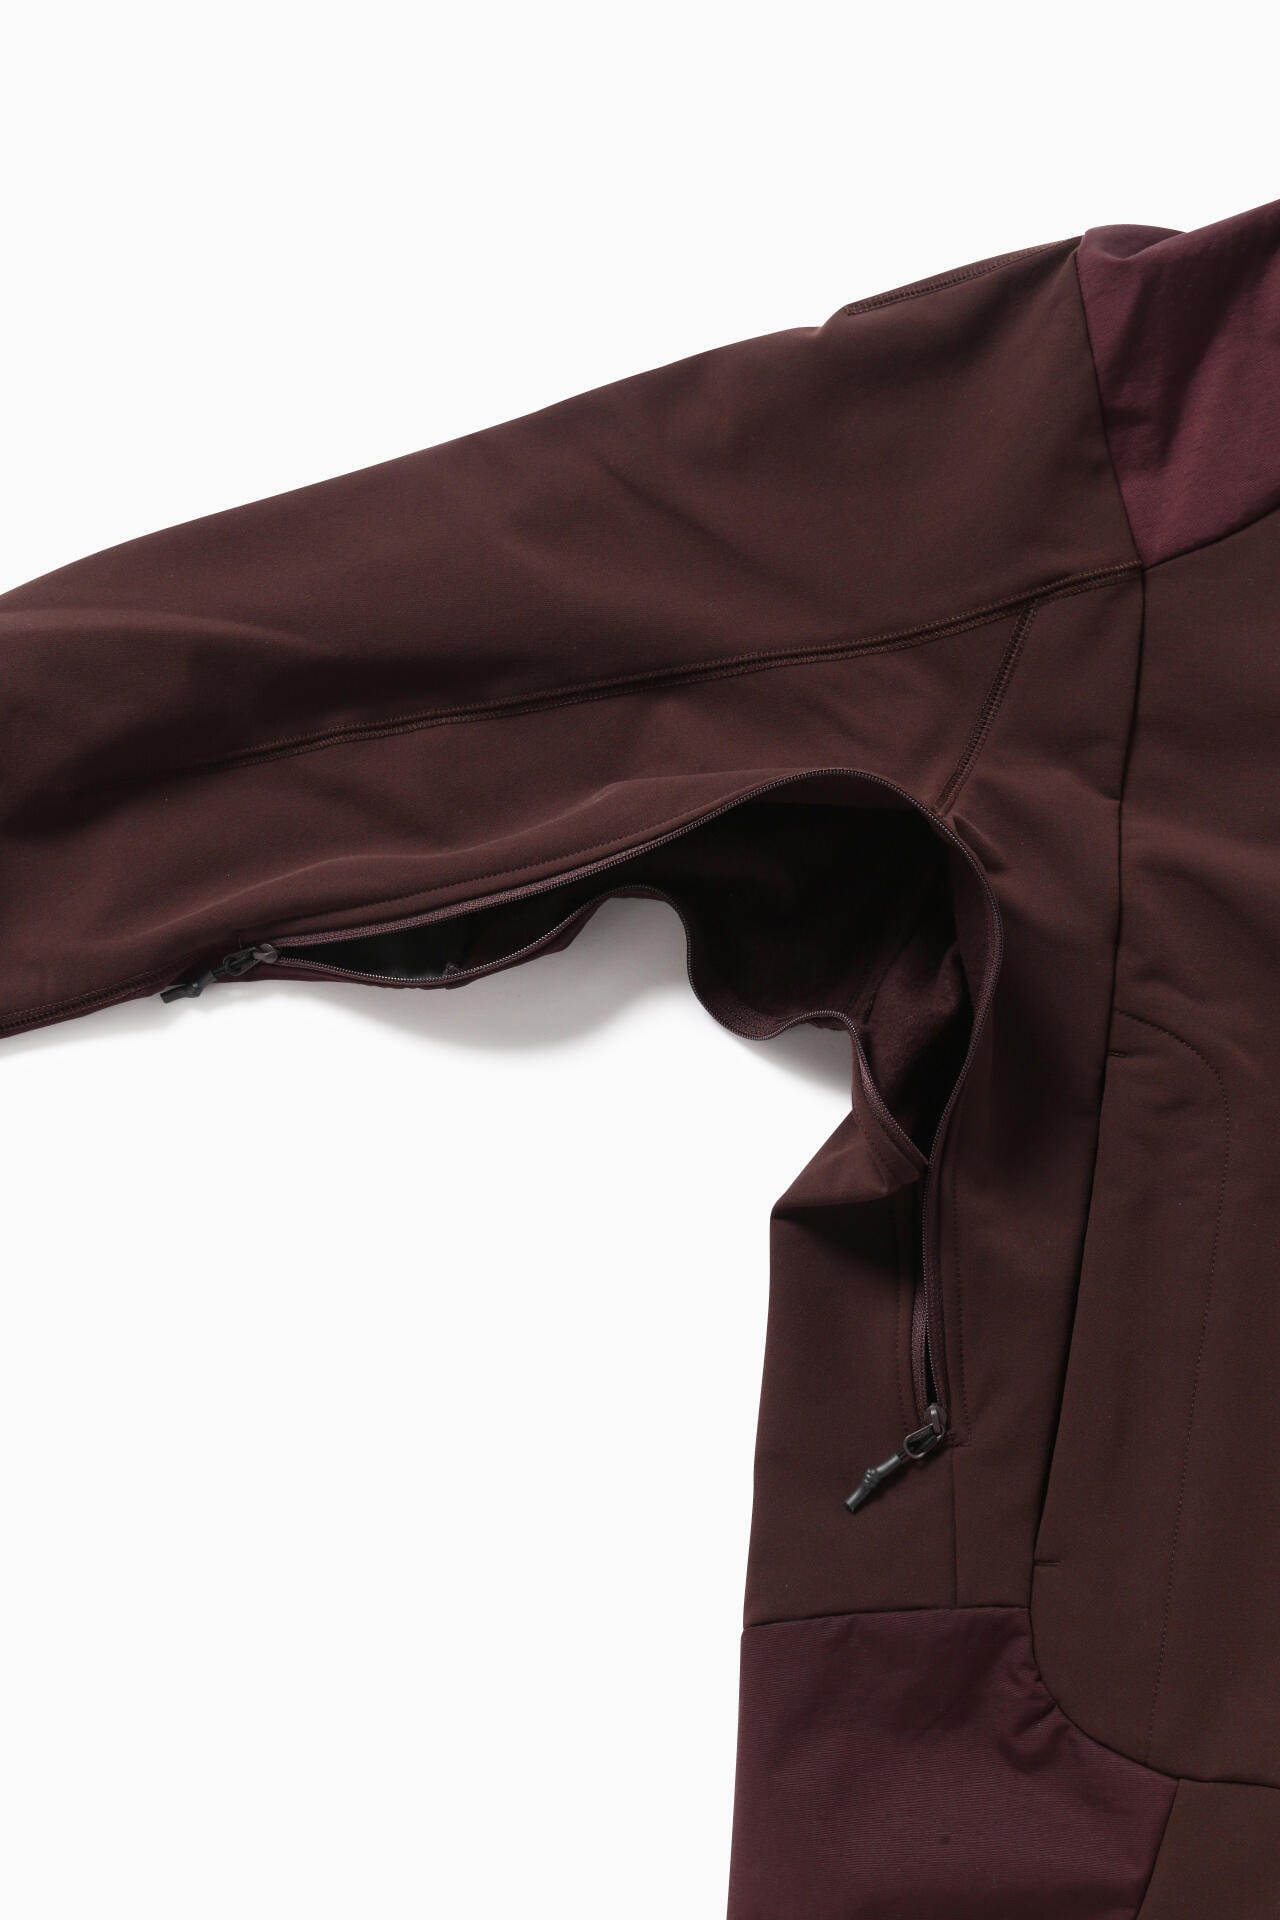 stretch shell jacket | outerwear | and wander ONLINE STORE